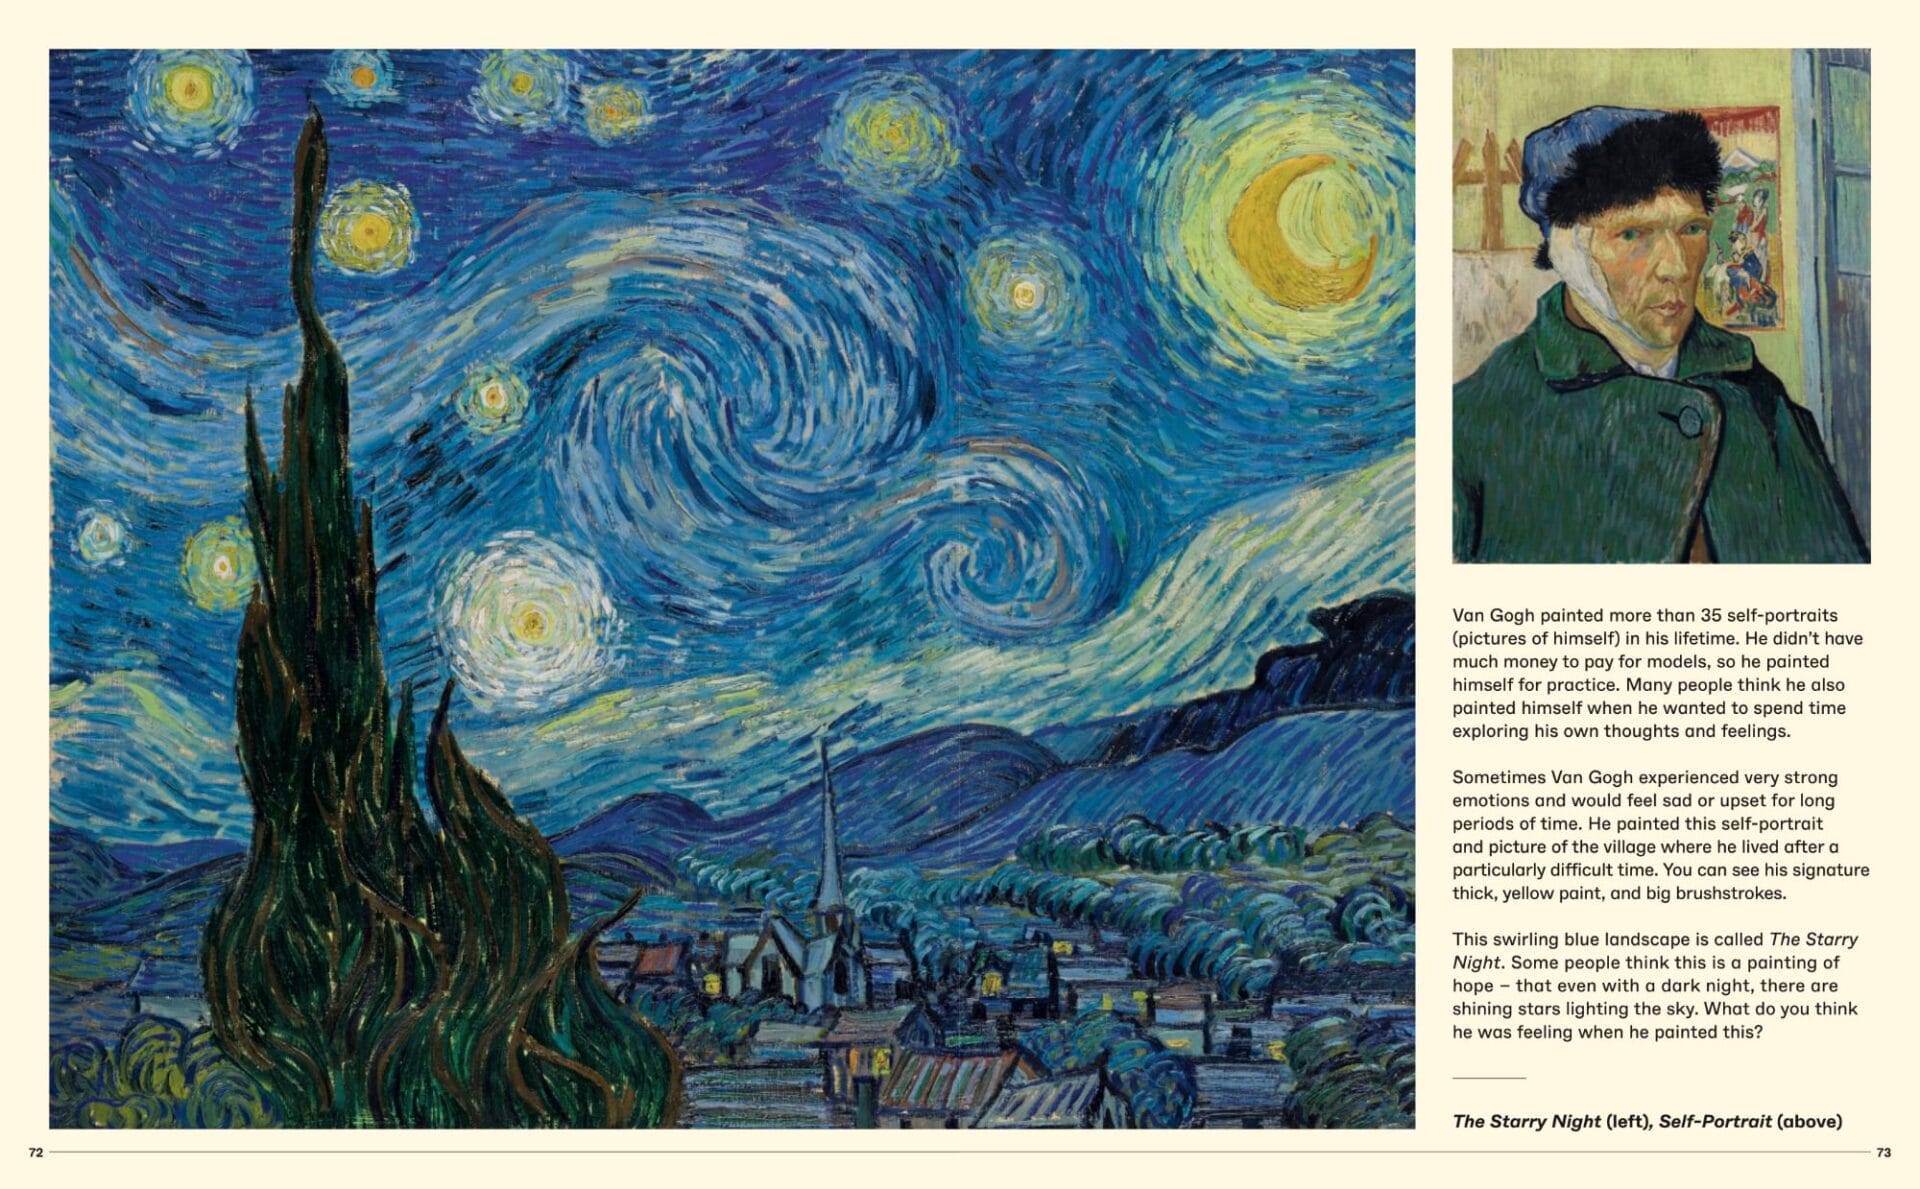 vincent van gogh's iconic the starry night painting with a swirling blue sky and town below. plus a self portrait of the artist and brief text